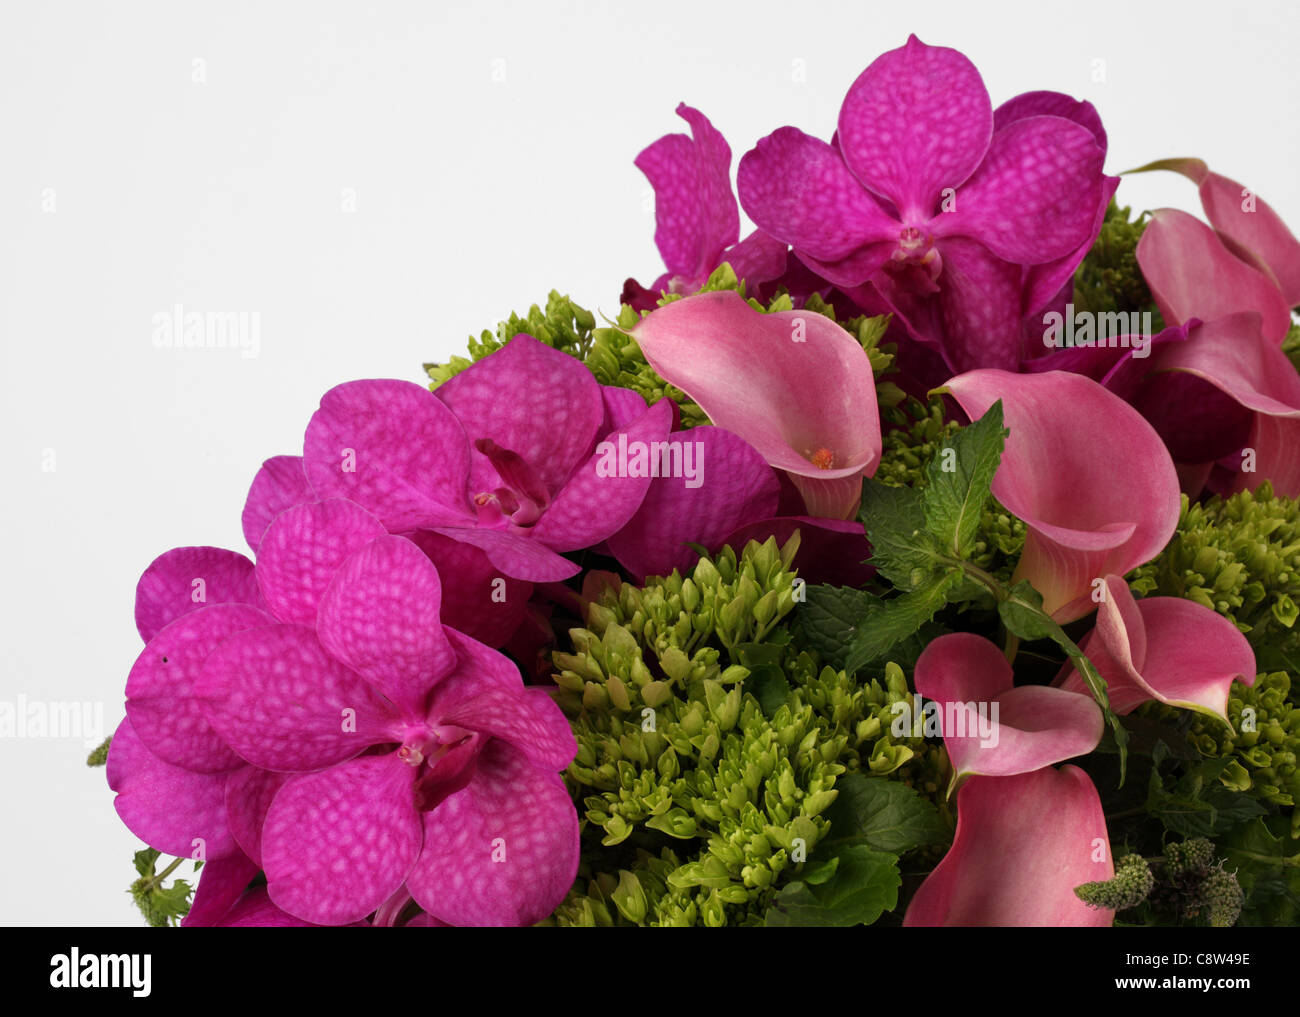 A close-up of a colorful bouquet of flowers. Pink calla lilies, purple vanda orchids, green unknown spray. Stock Photo